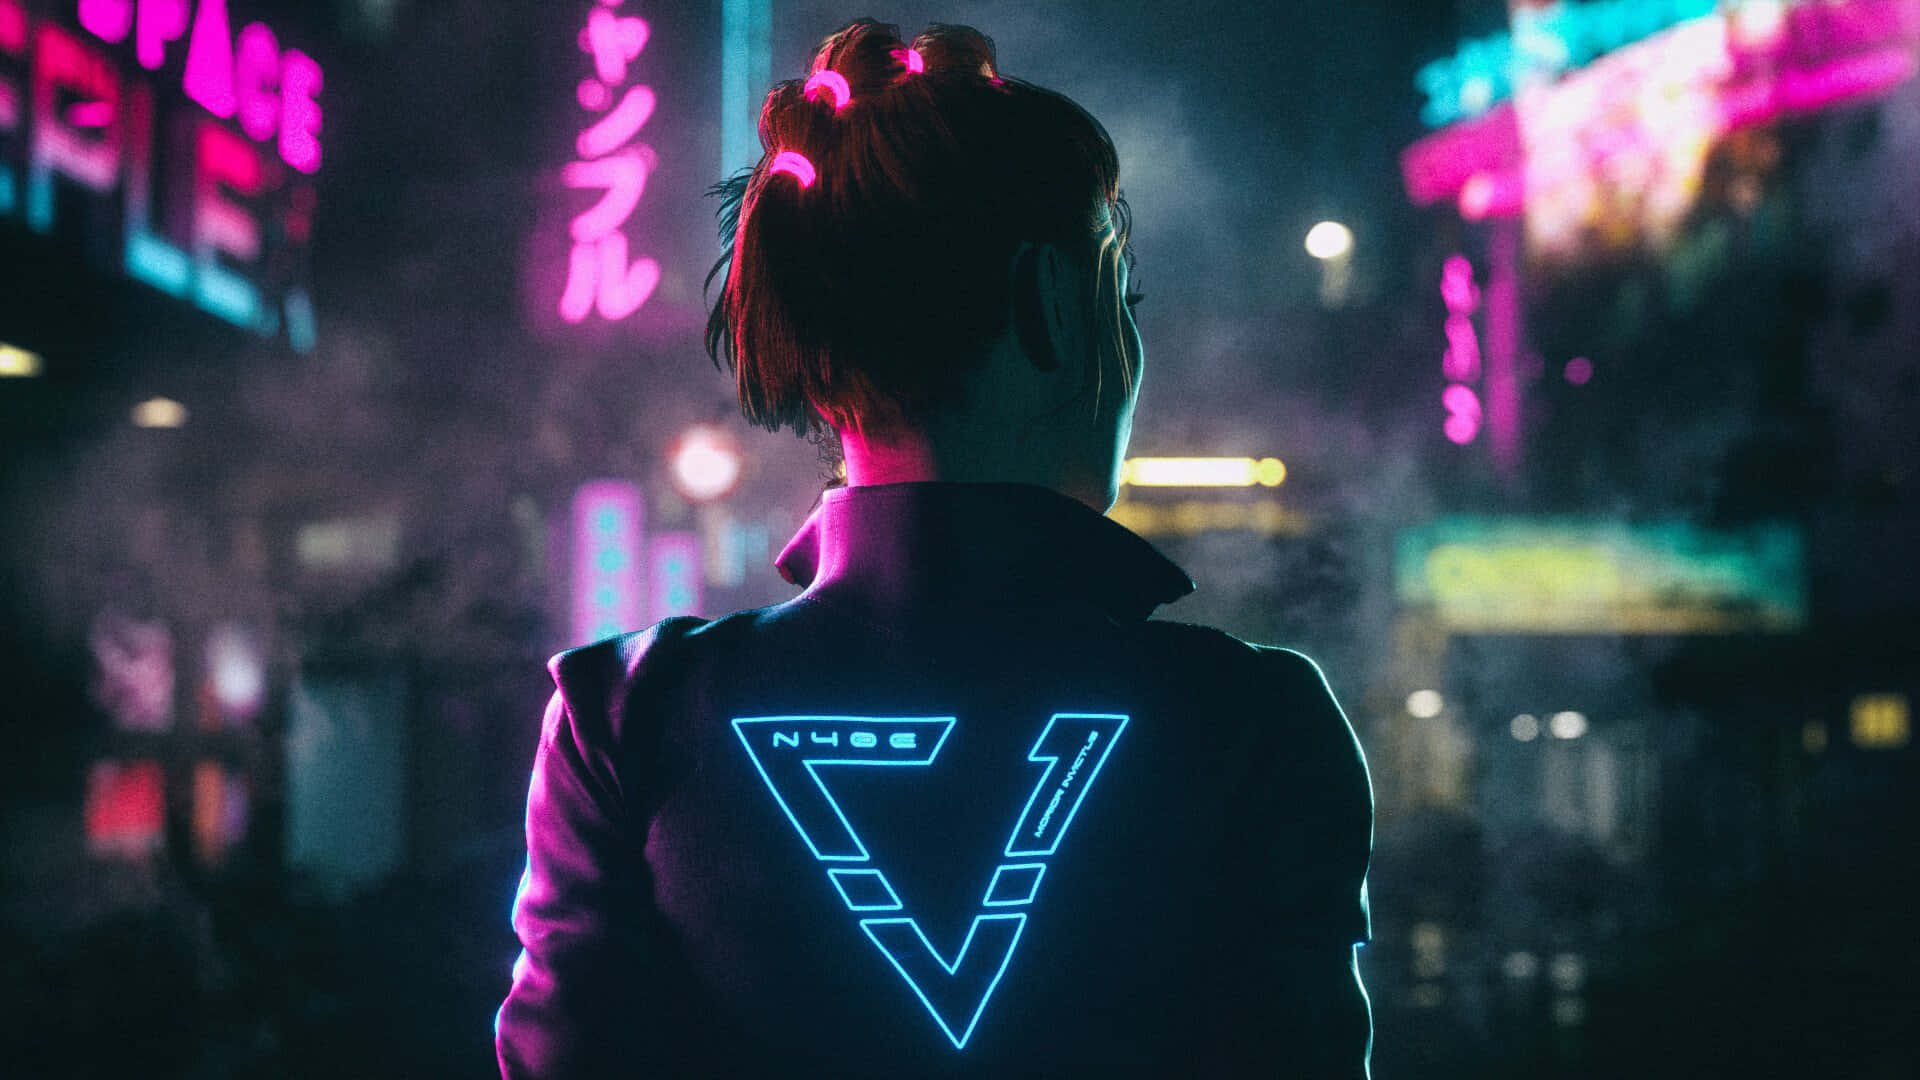 "Explore the future of Japan with a cyberpunk twist." Wallpaper